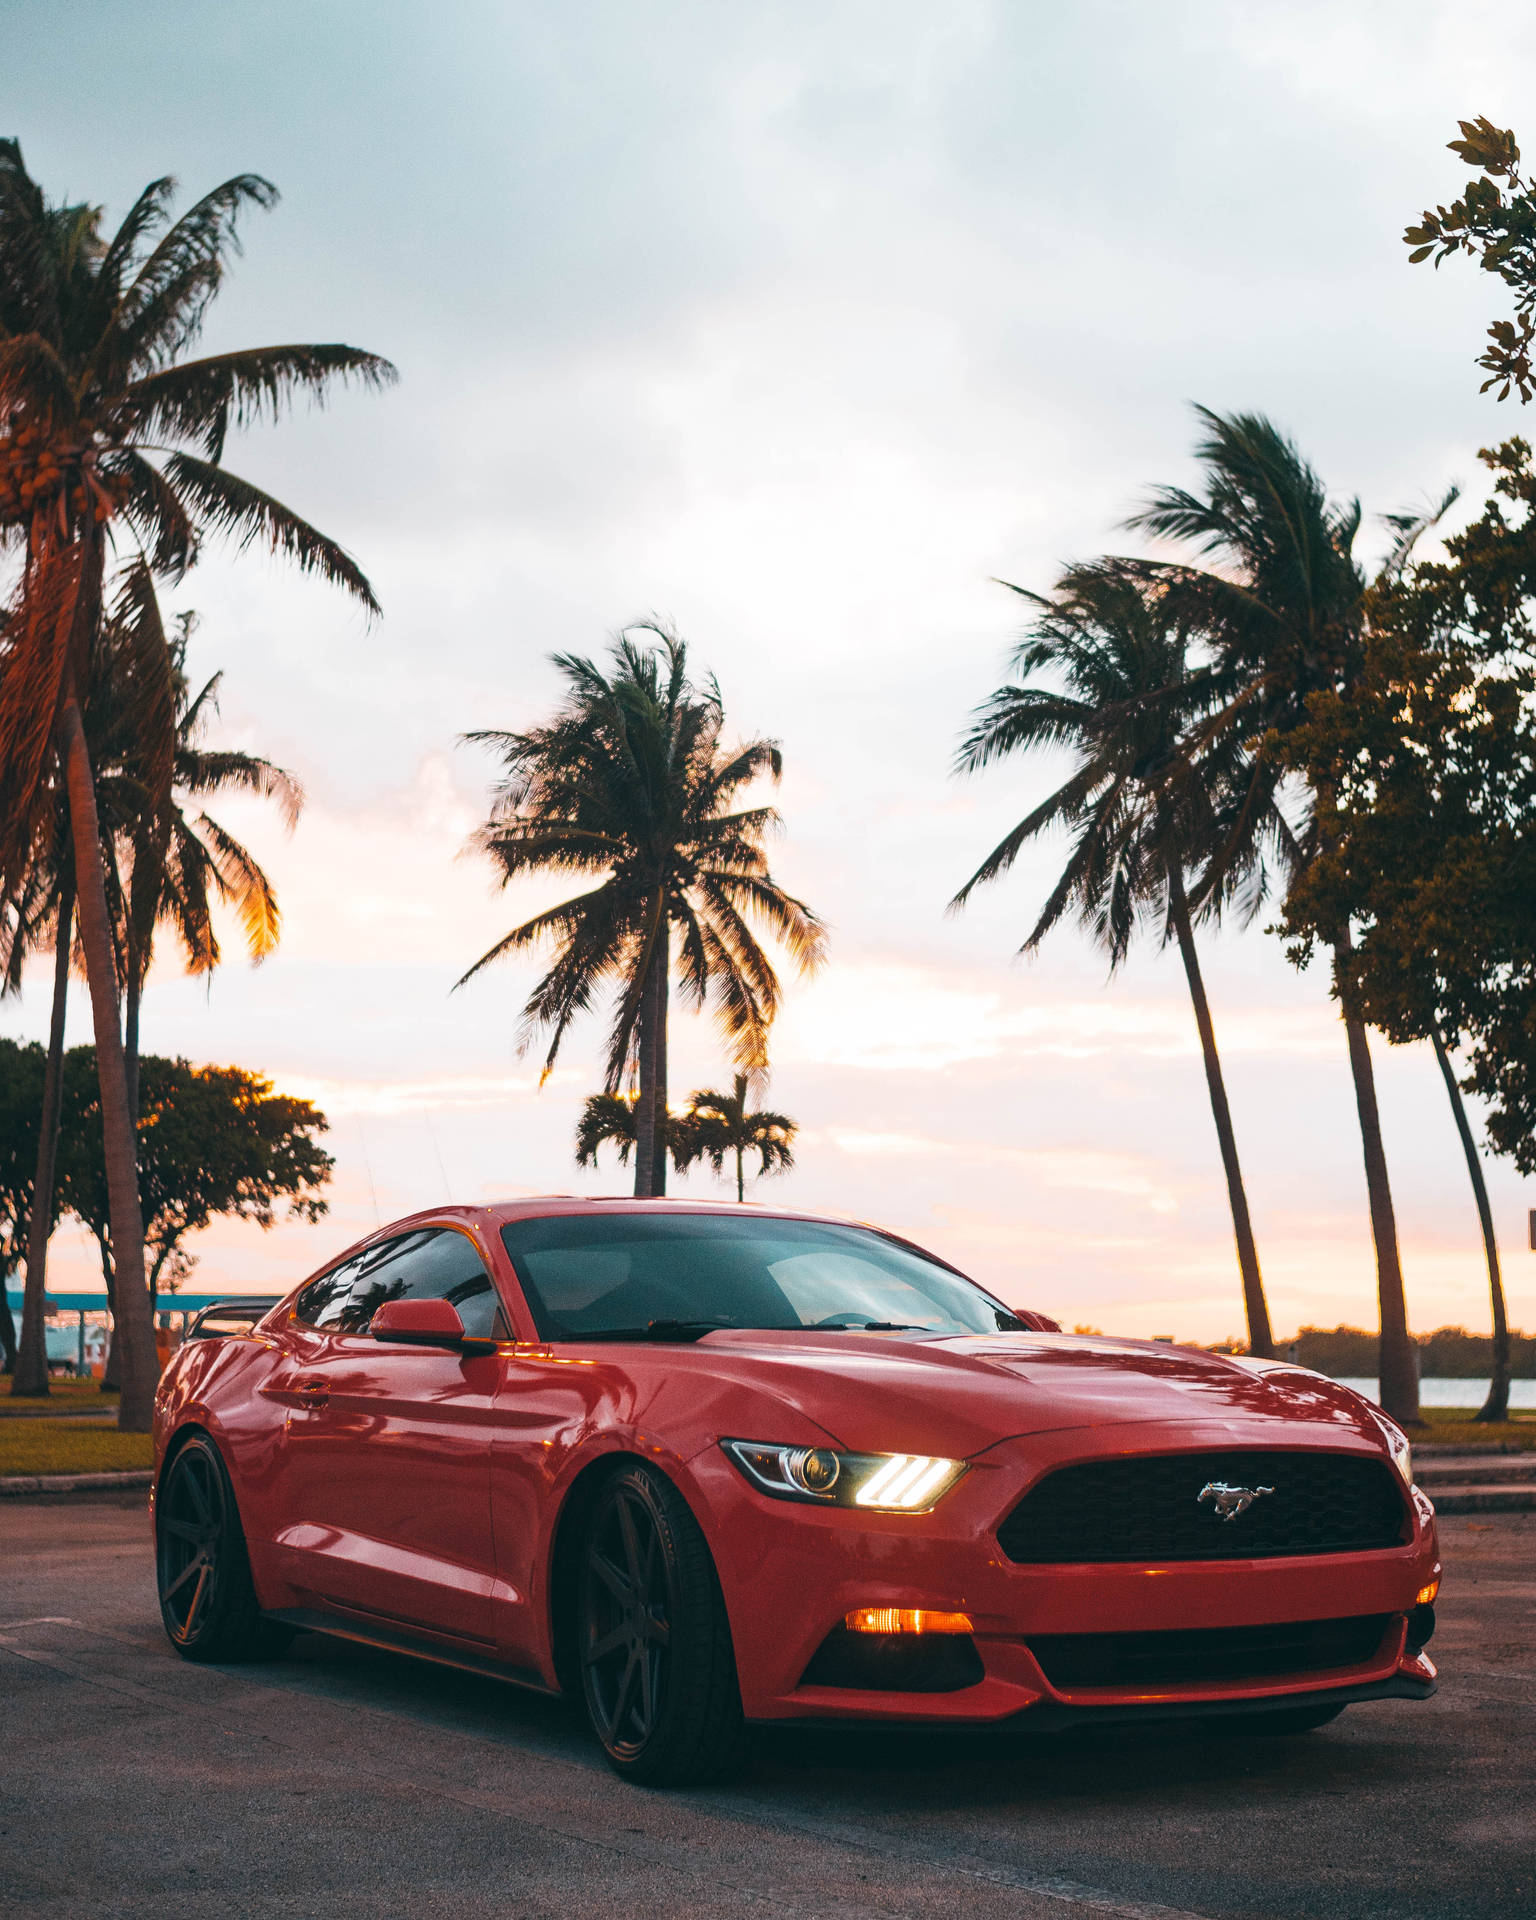 Red Ford Mustang Gt In Sun Set Palm Trees Background